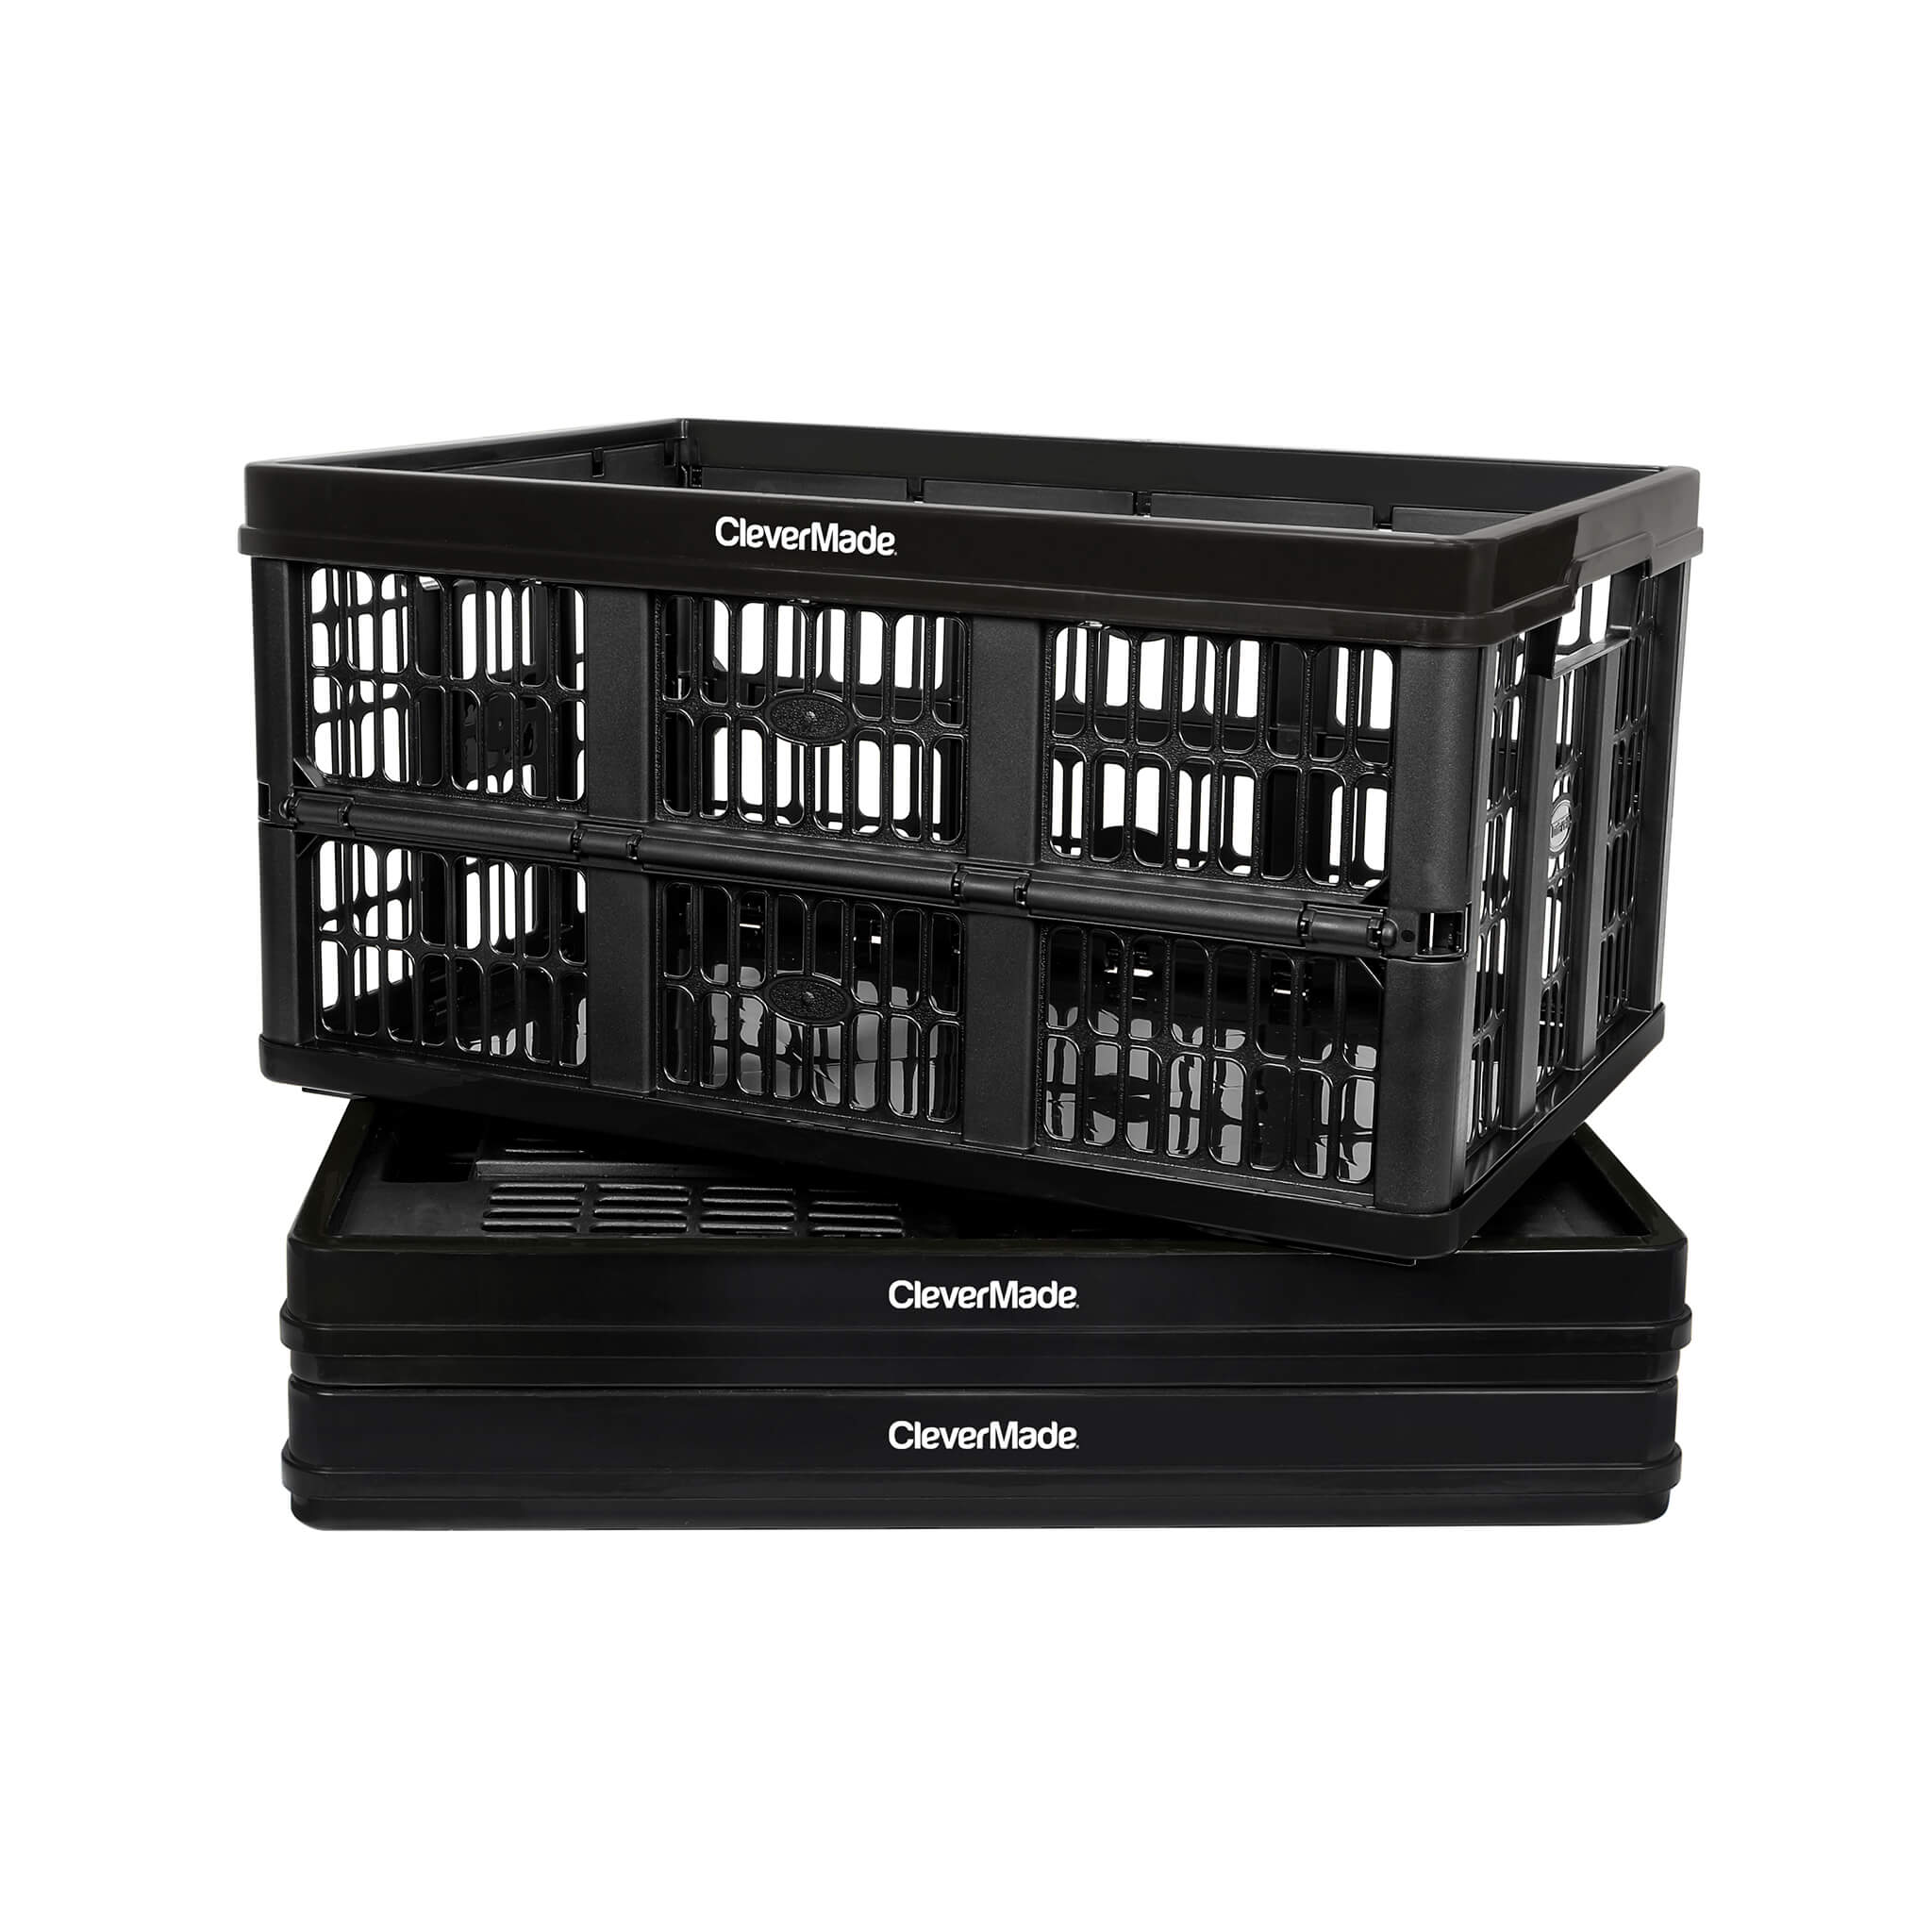 Clevermade CleverCrates Folding Crate, Black, 46 Liter